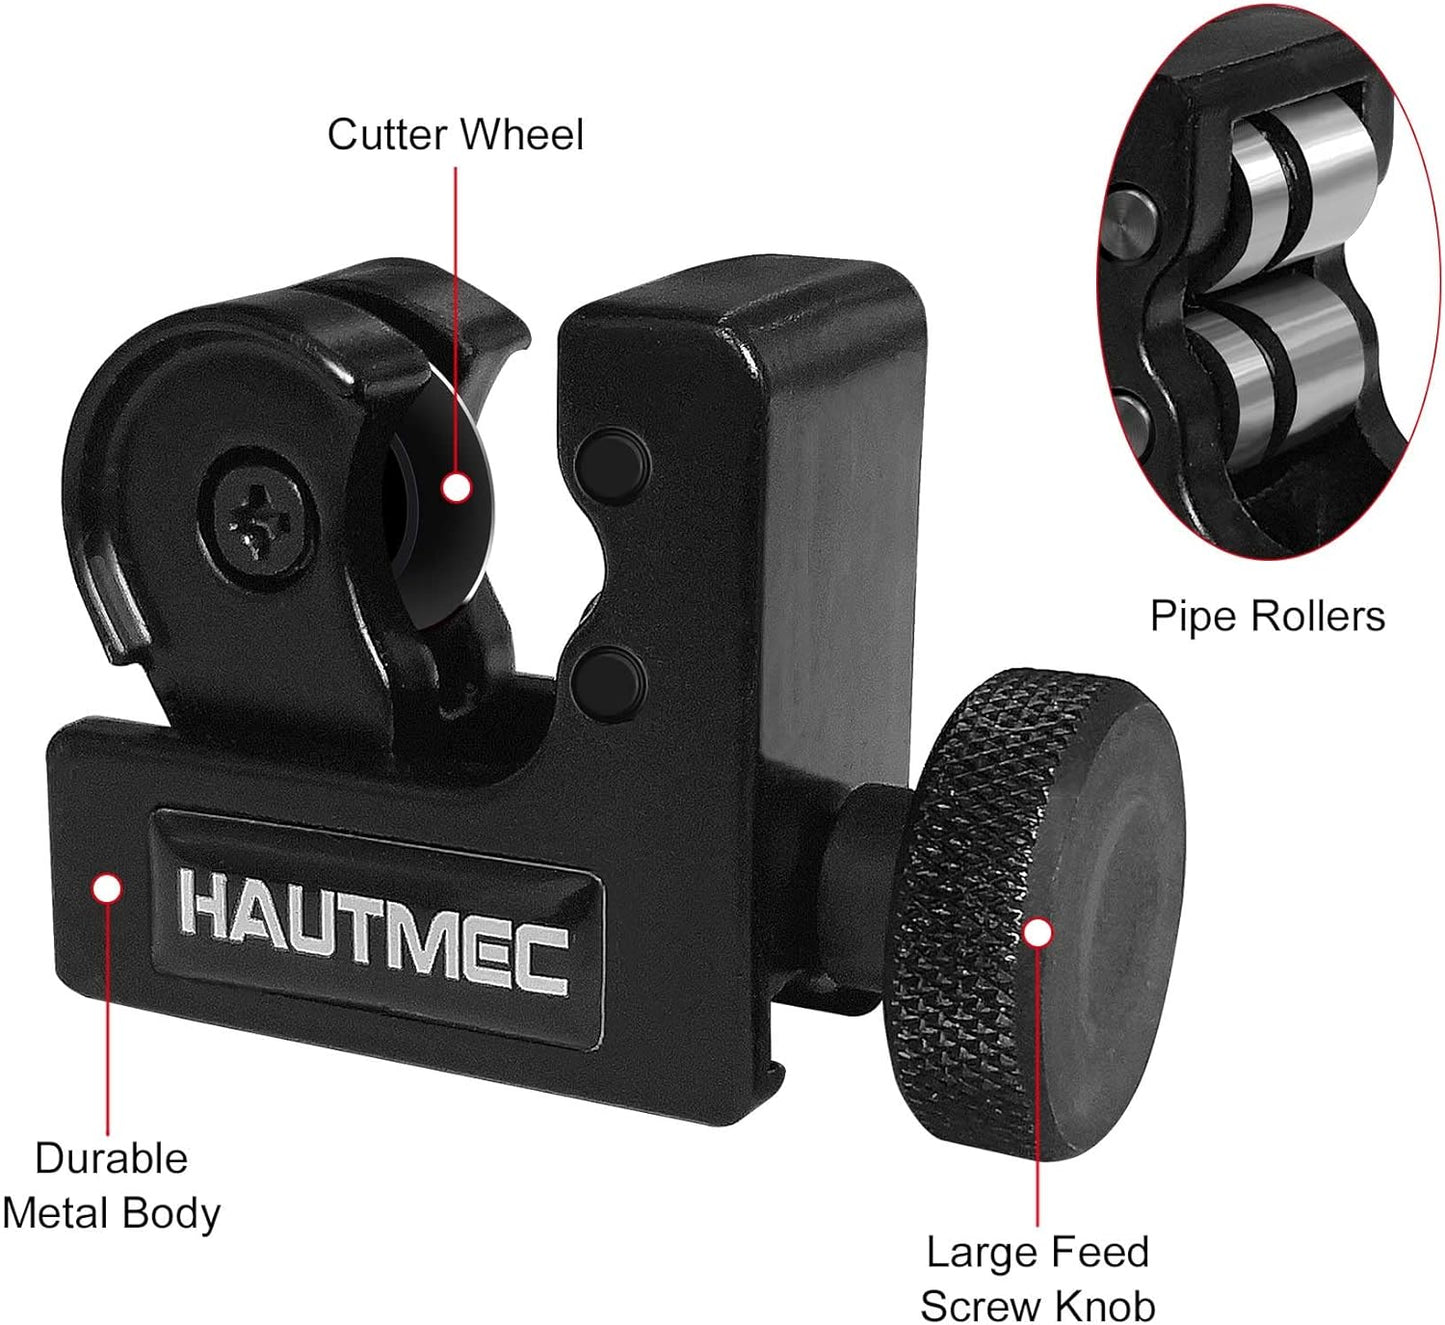 HAUTMEC Mini Tube Cutter Of Diameter from 1/8" to 5/8" OD (3-16mm), Heavy Duty Pipe Cutter for PVC, Copper, Aluminum, and Thin Stainless Steel Tube HT0131-TC